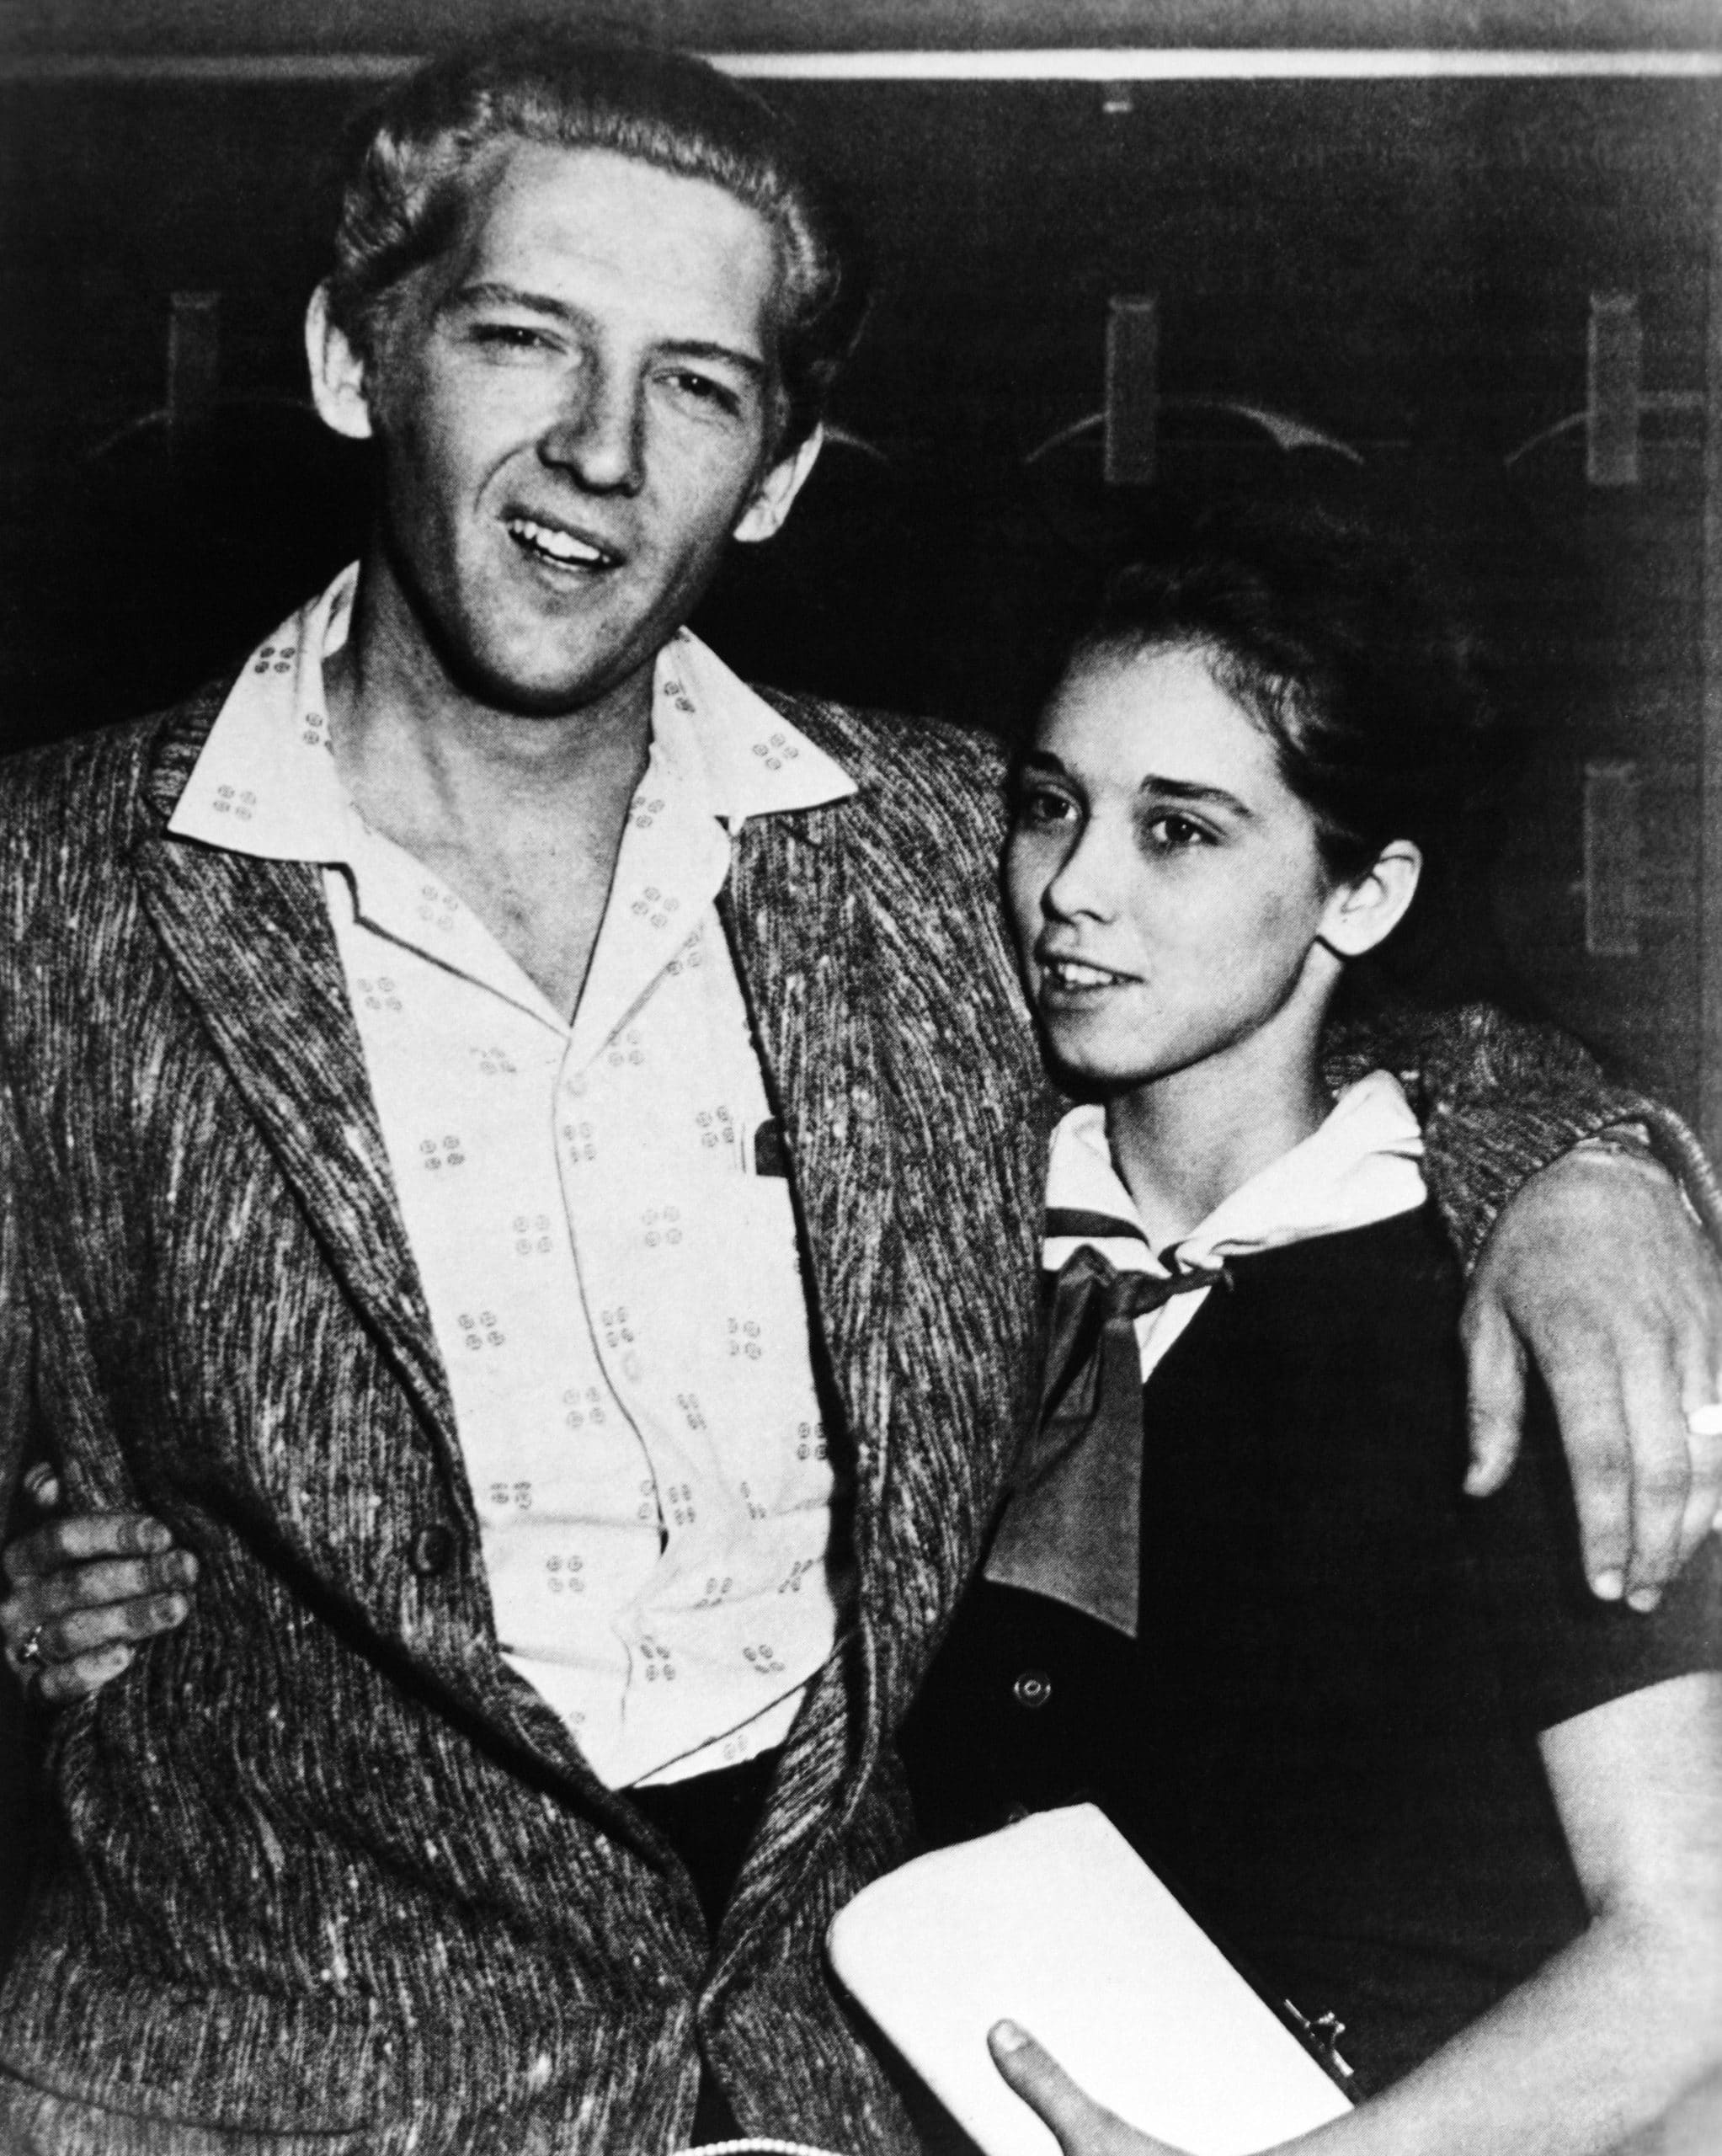 From left: Jerry Lee Lewis, Myra Gale Lewis, ca. 1957